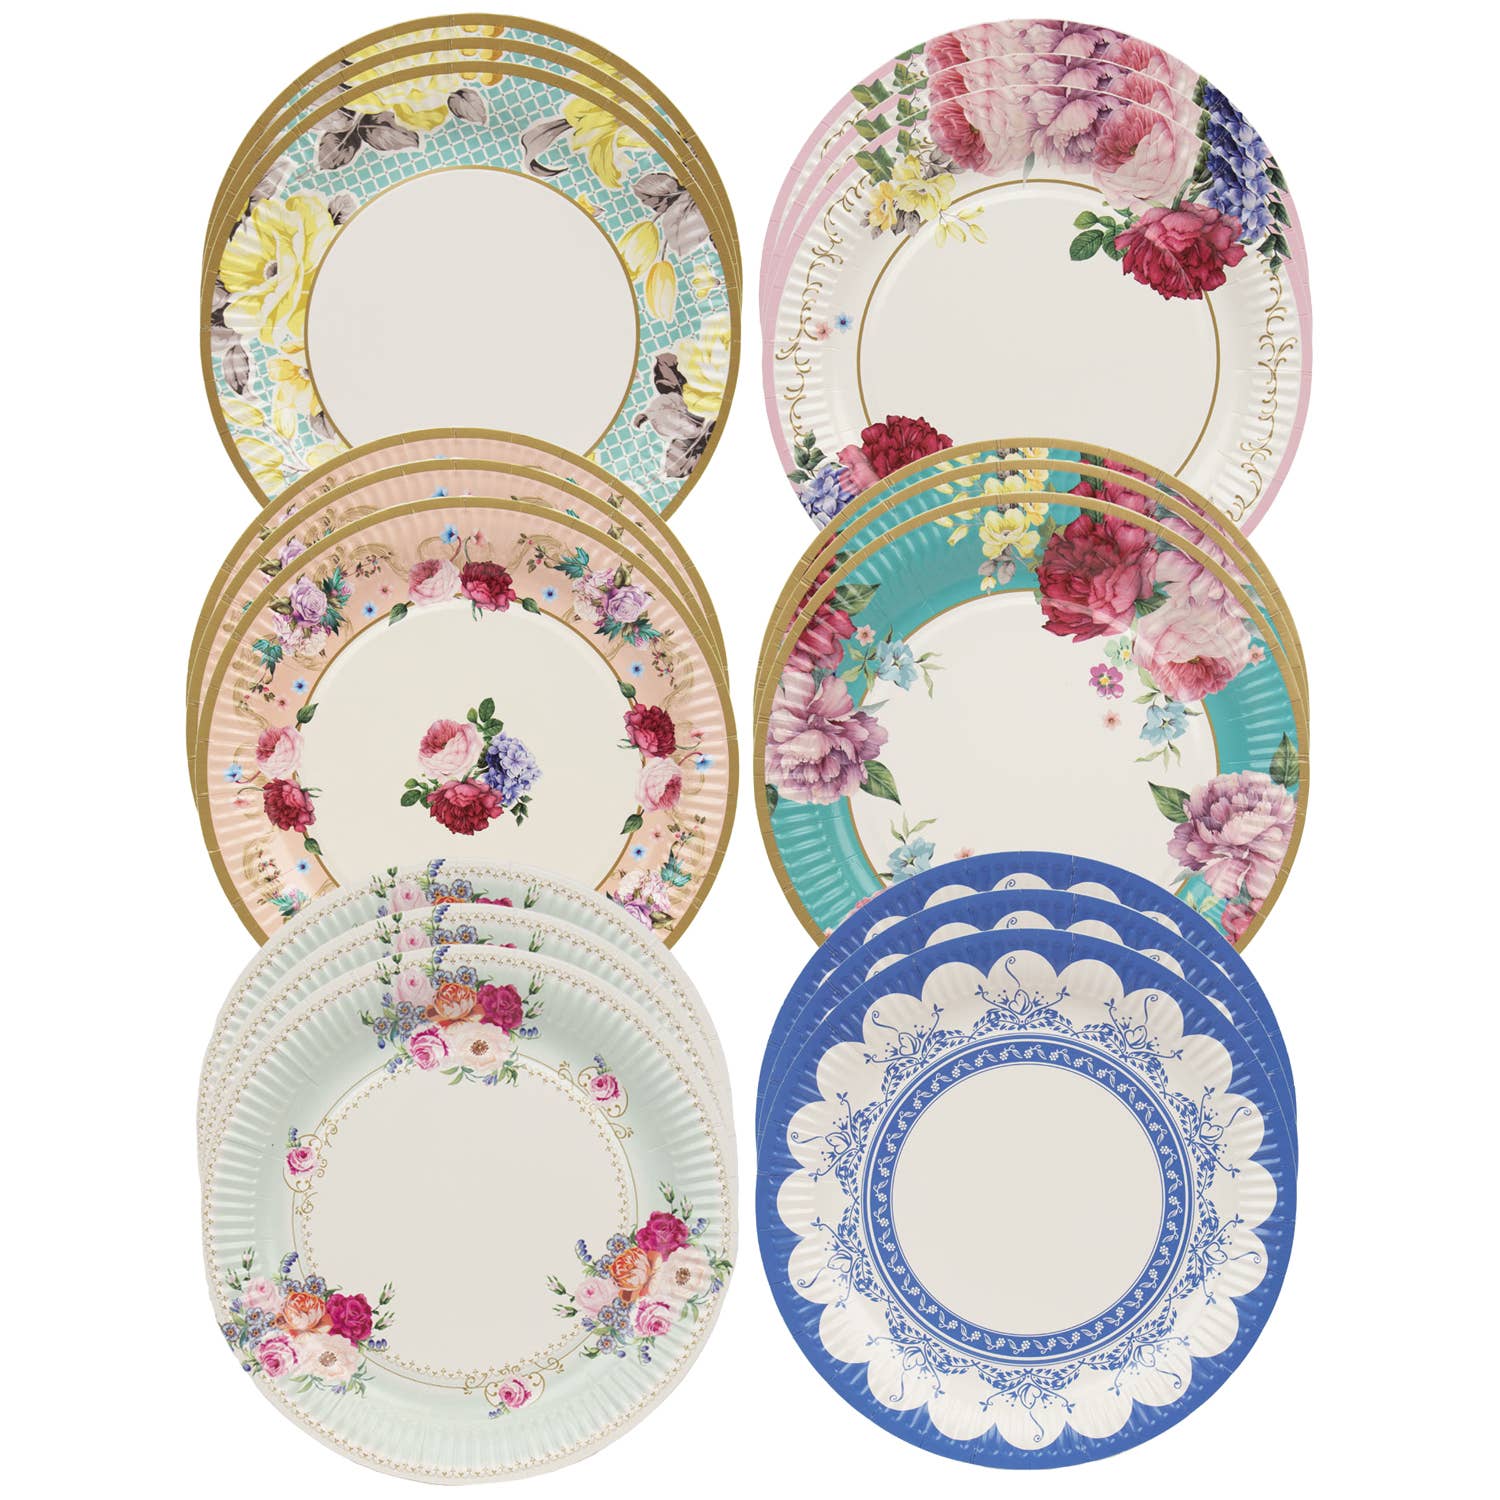 Truly Scrumptious Round Vintage Paper Plates - 24 Pack